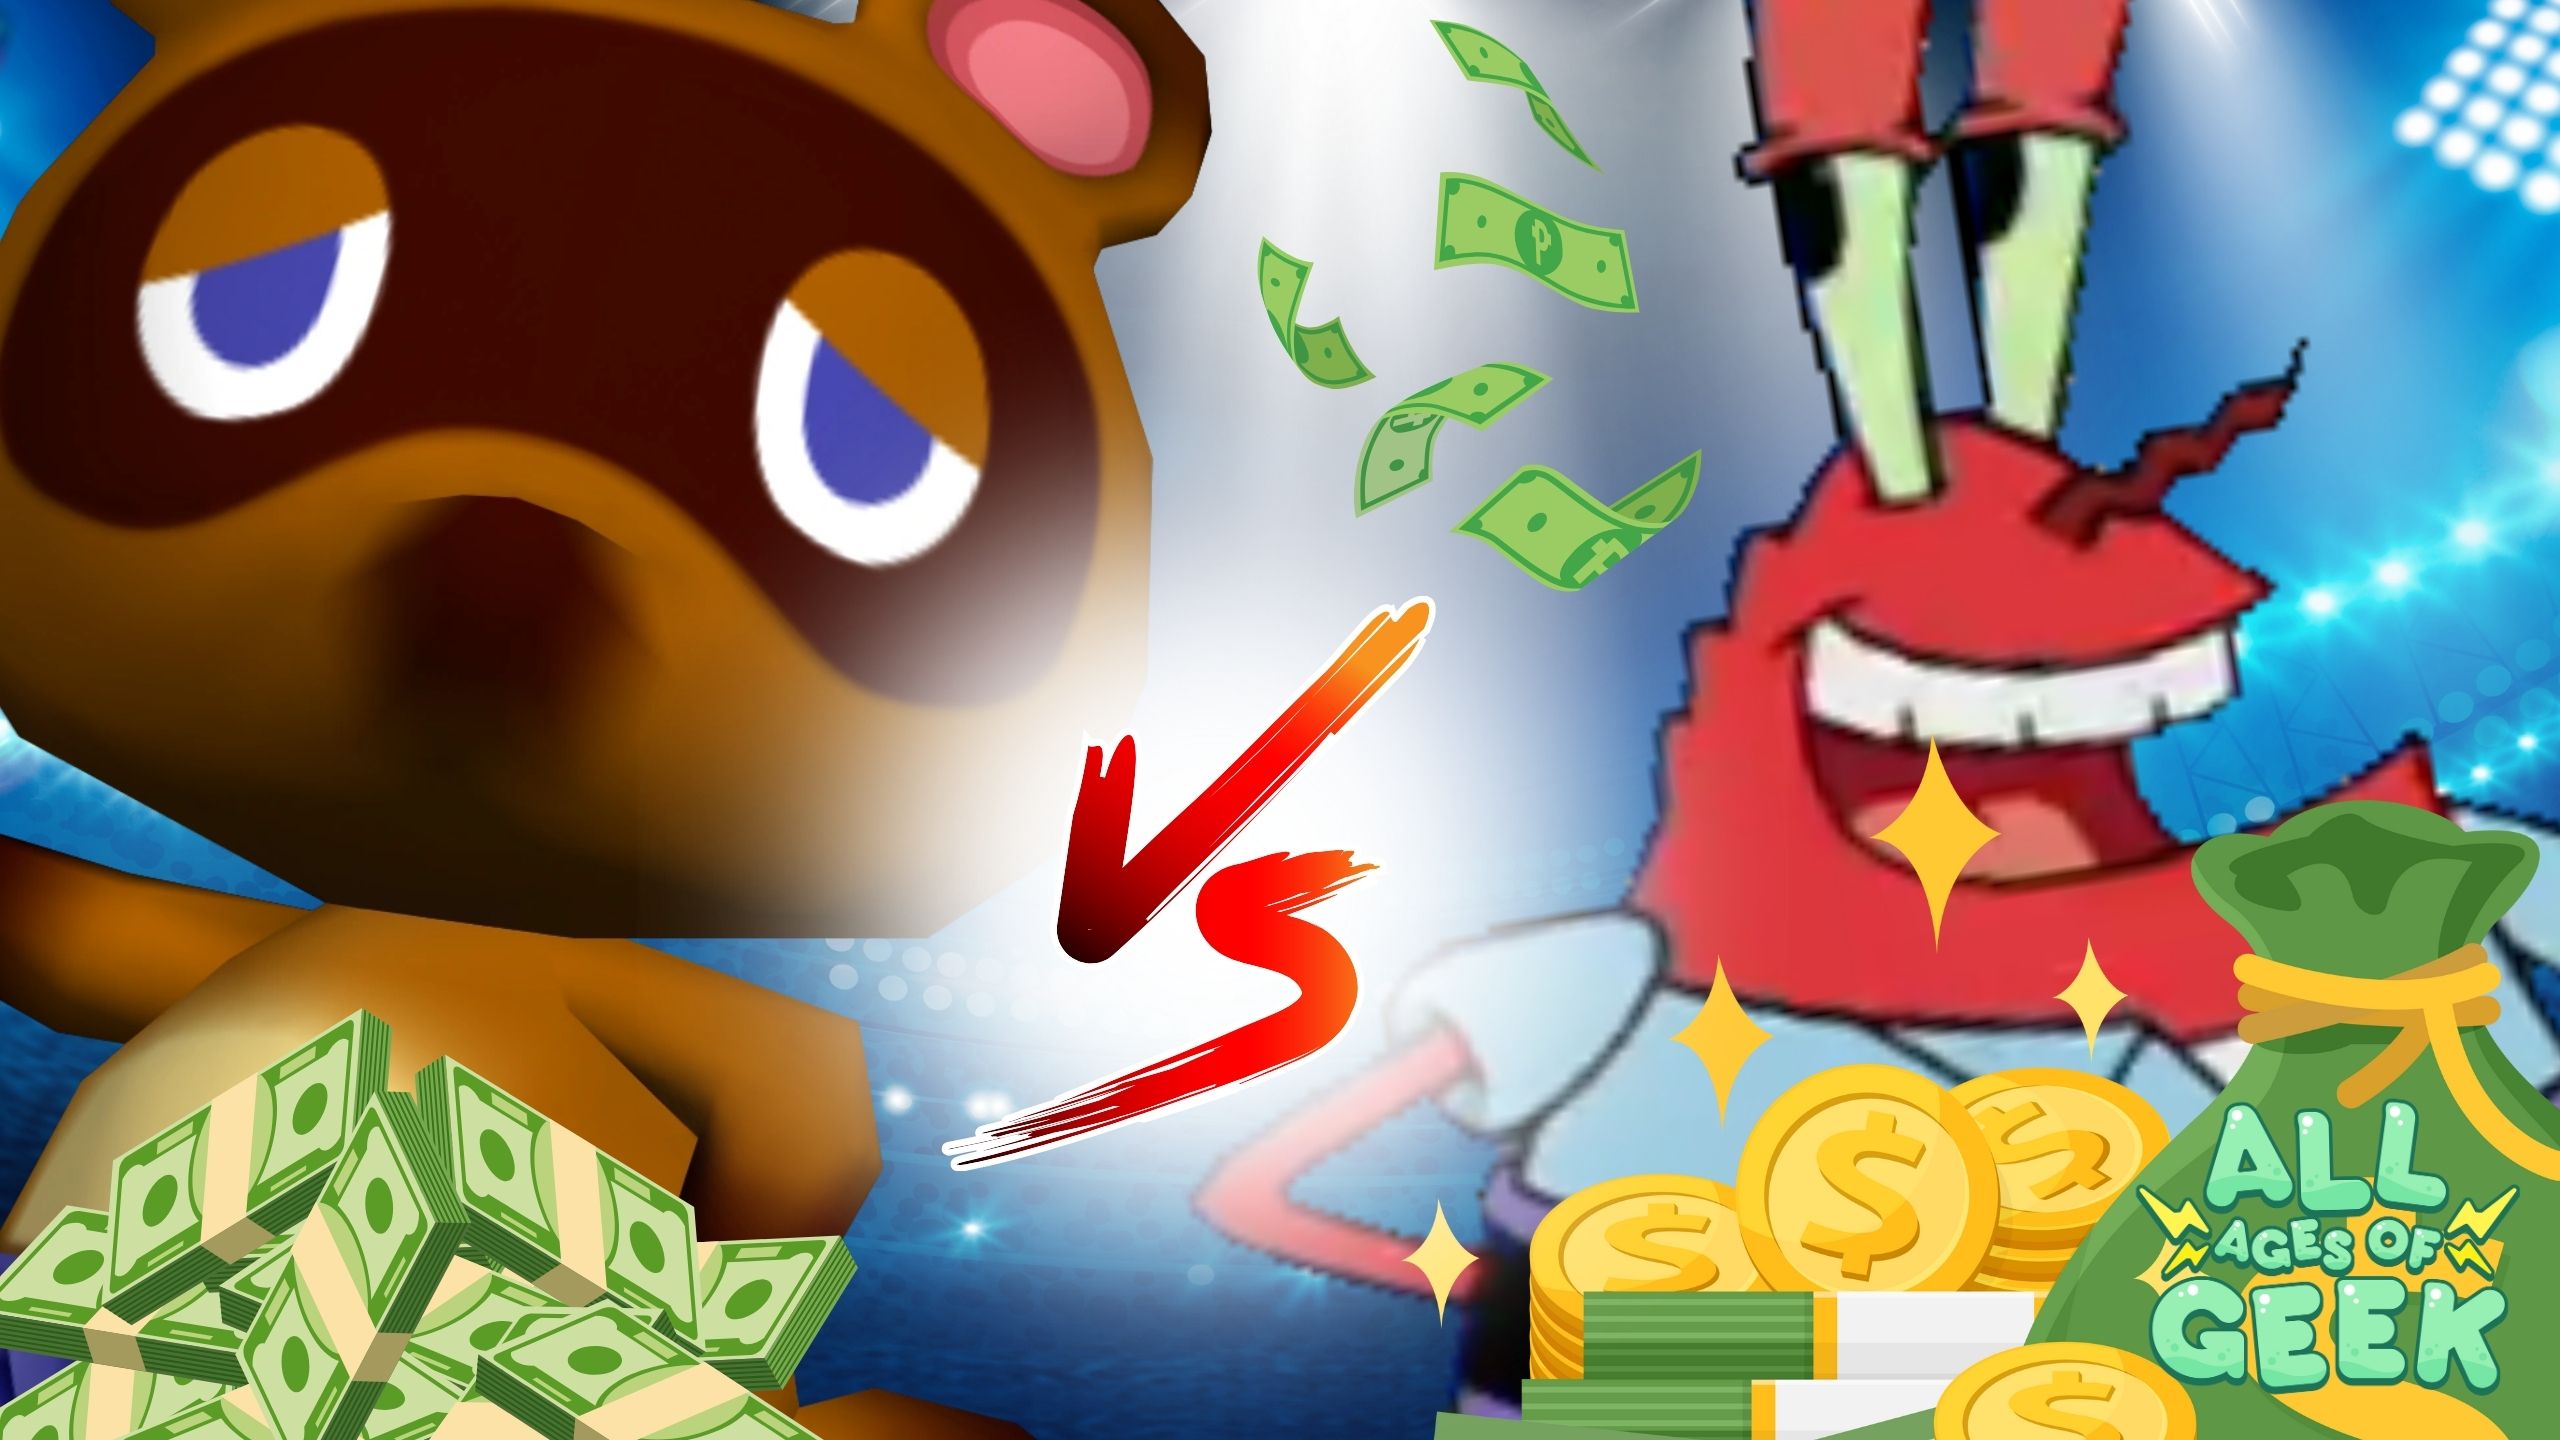 Showdown image featuring Tom Nook from Animal Crossing on the left and Mr. Krabs from SpongeBob SquarePants on the right. The 'VS' symbol is prominently displayed in the center with money and gold coins surrounding both characters. The All Ages of Geek logo is visible in the bottom right corner